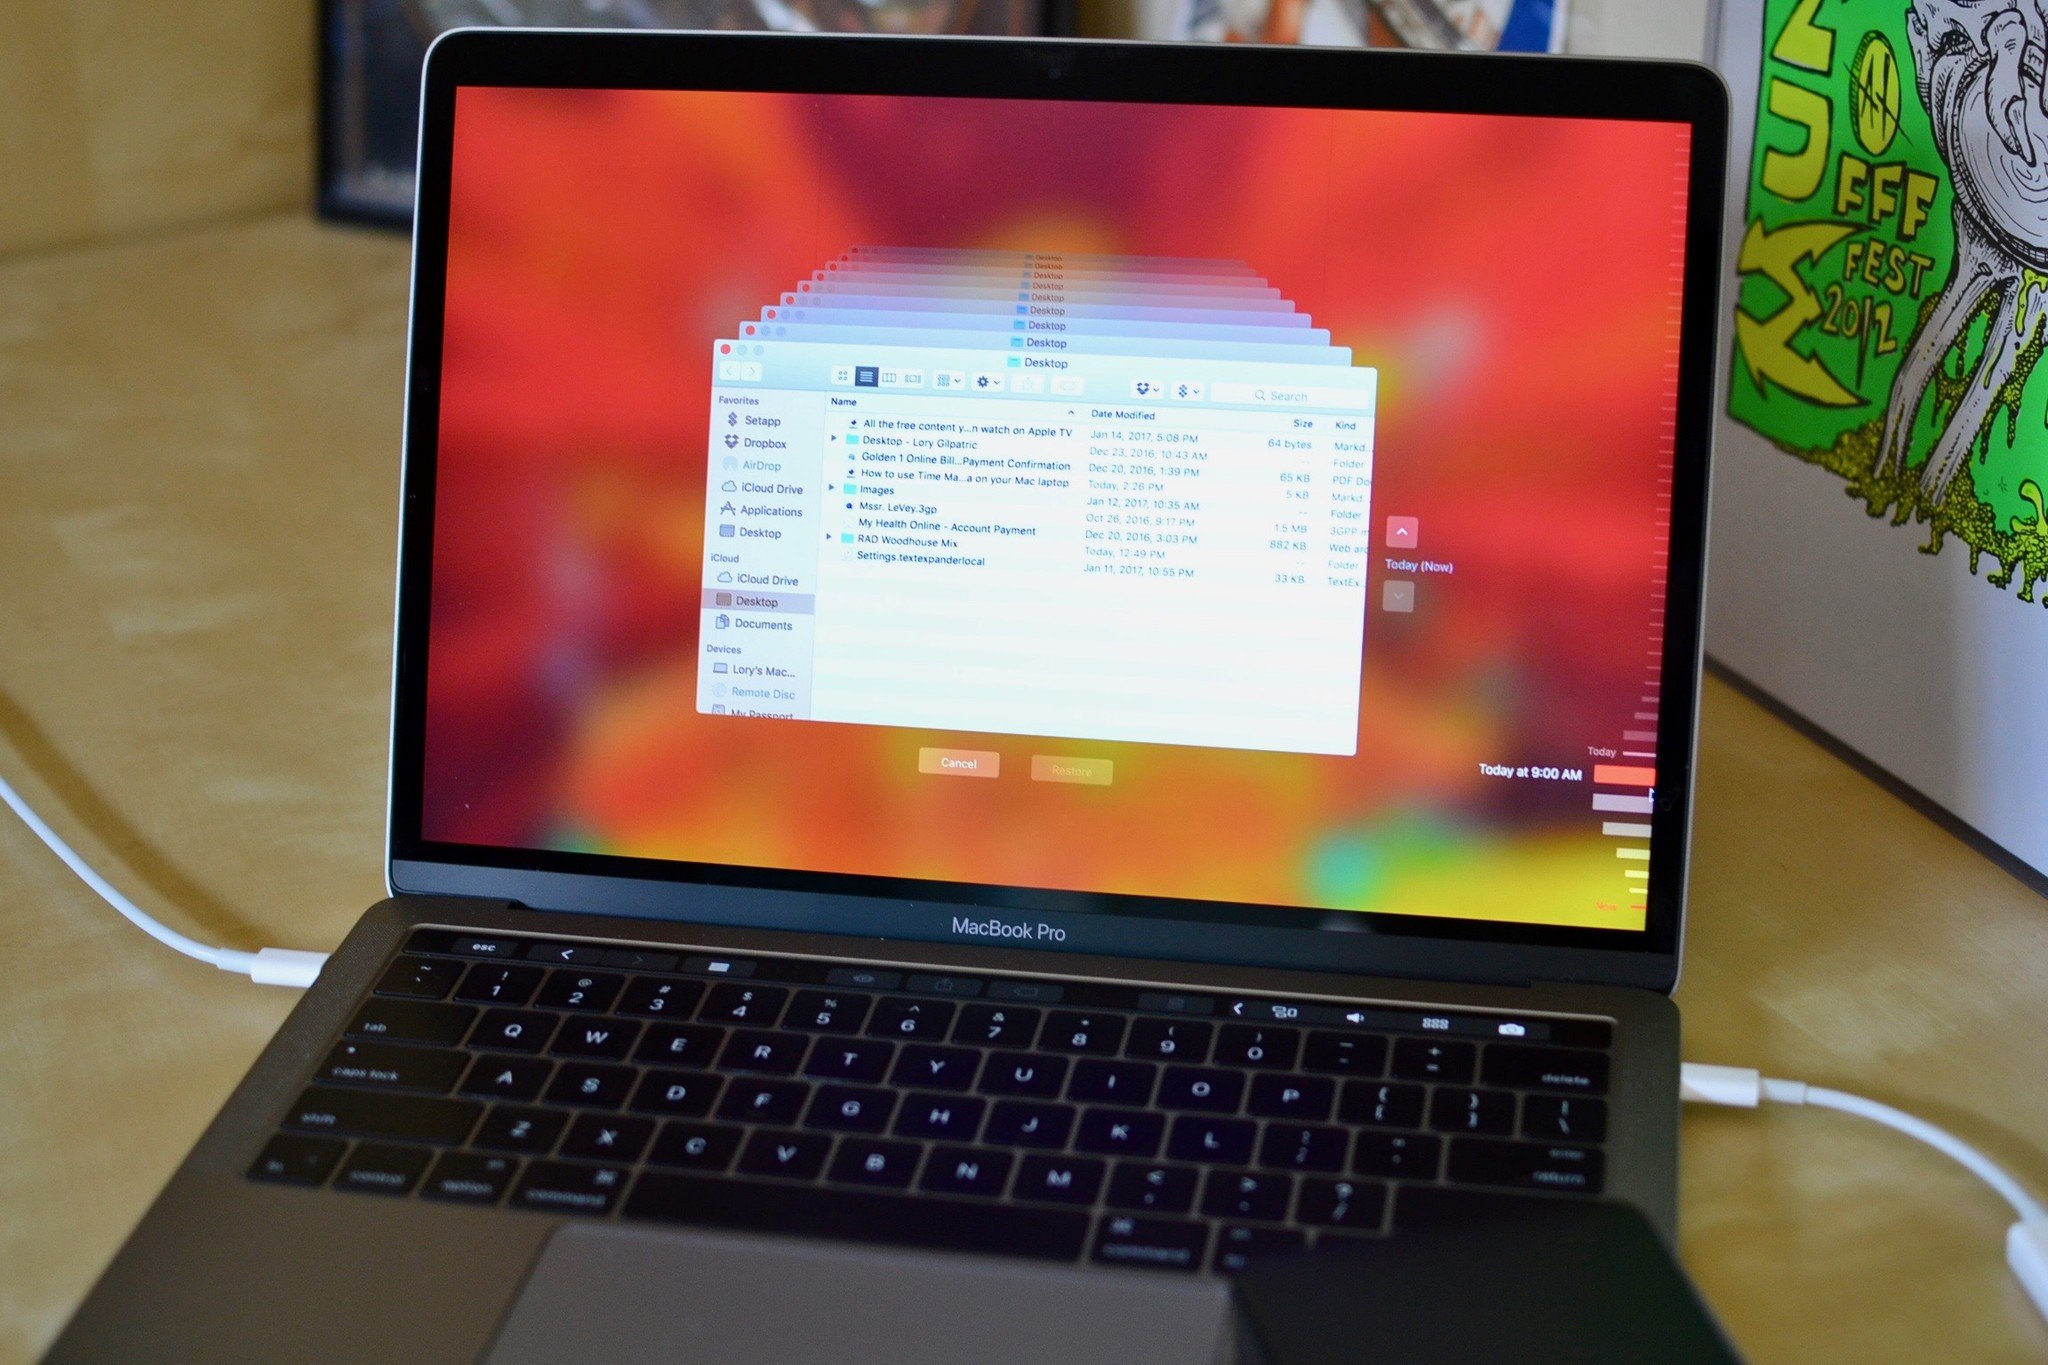 Don't lose important data on your Mac, make sure to back it up!